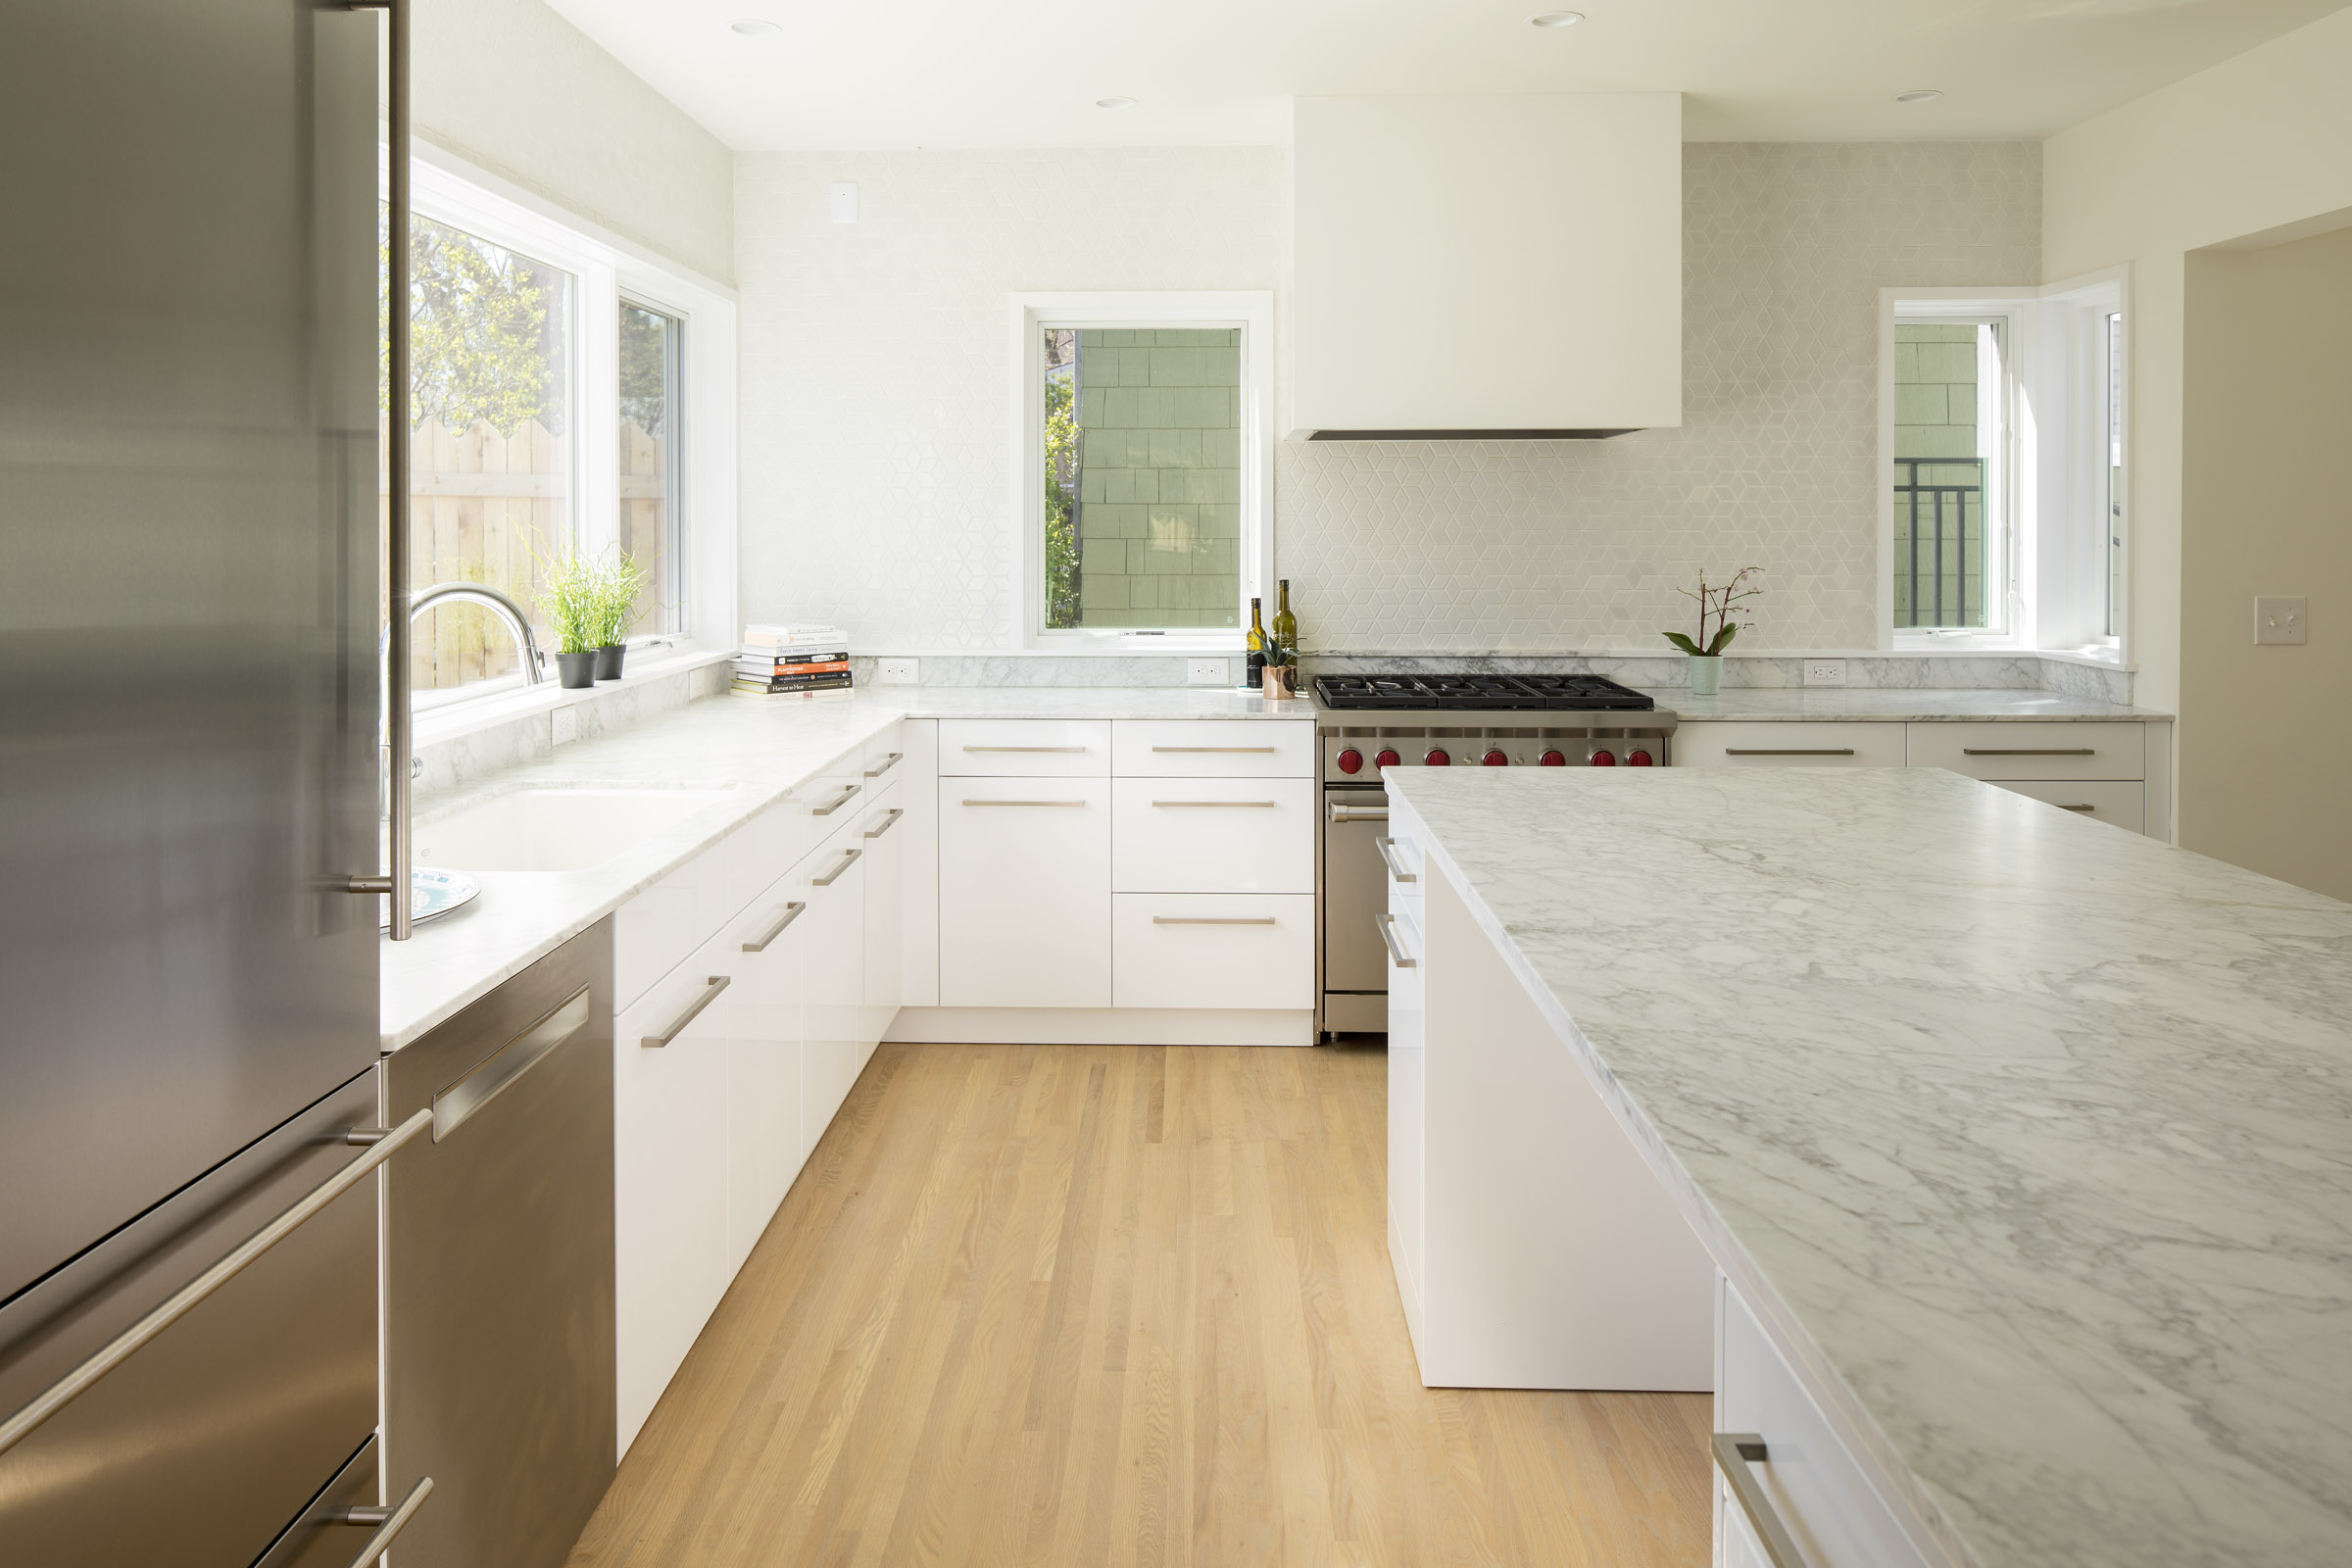 Modern white kitchen remodel with marble countertops and tile backsplash